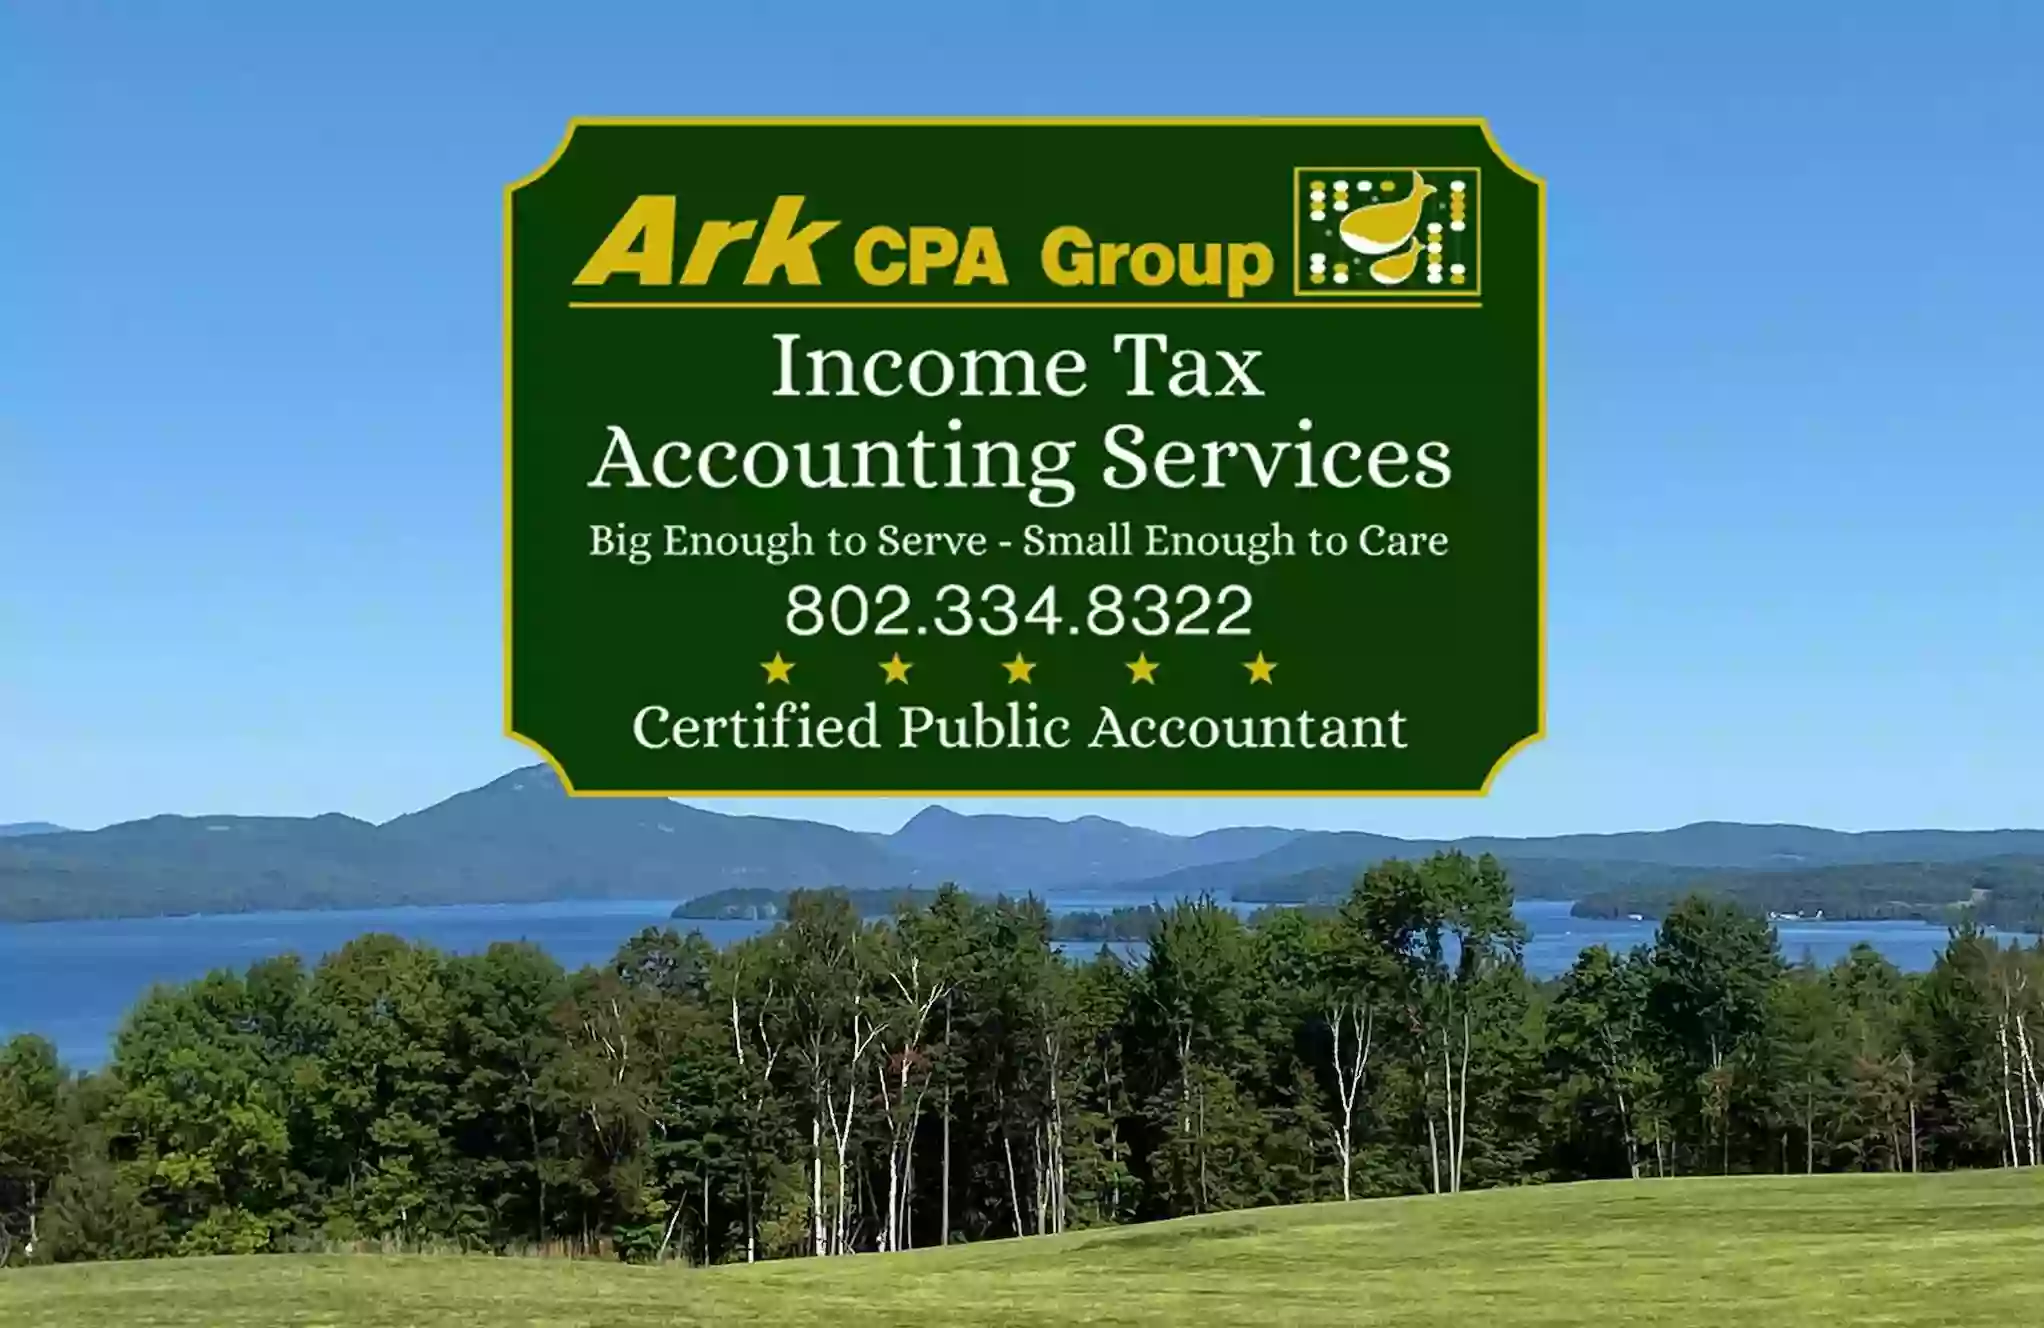 ARK CPA Group